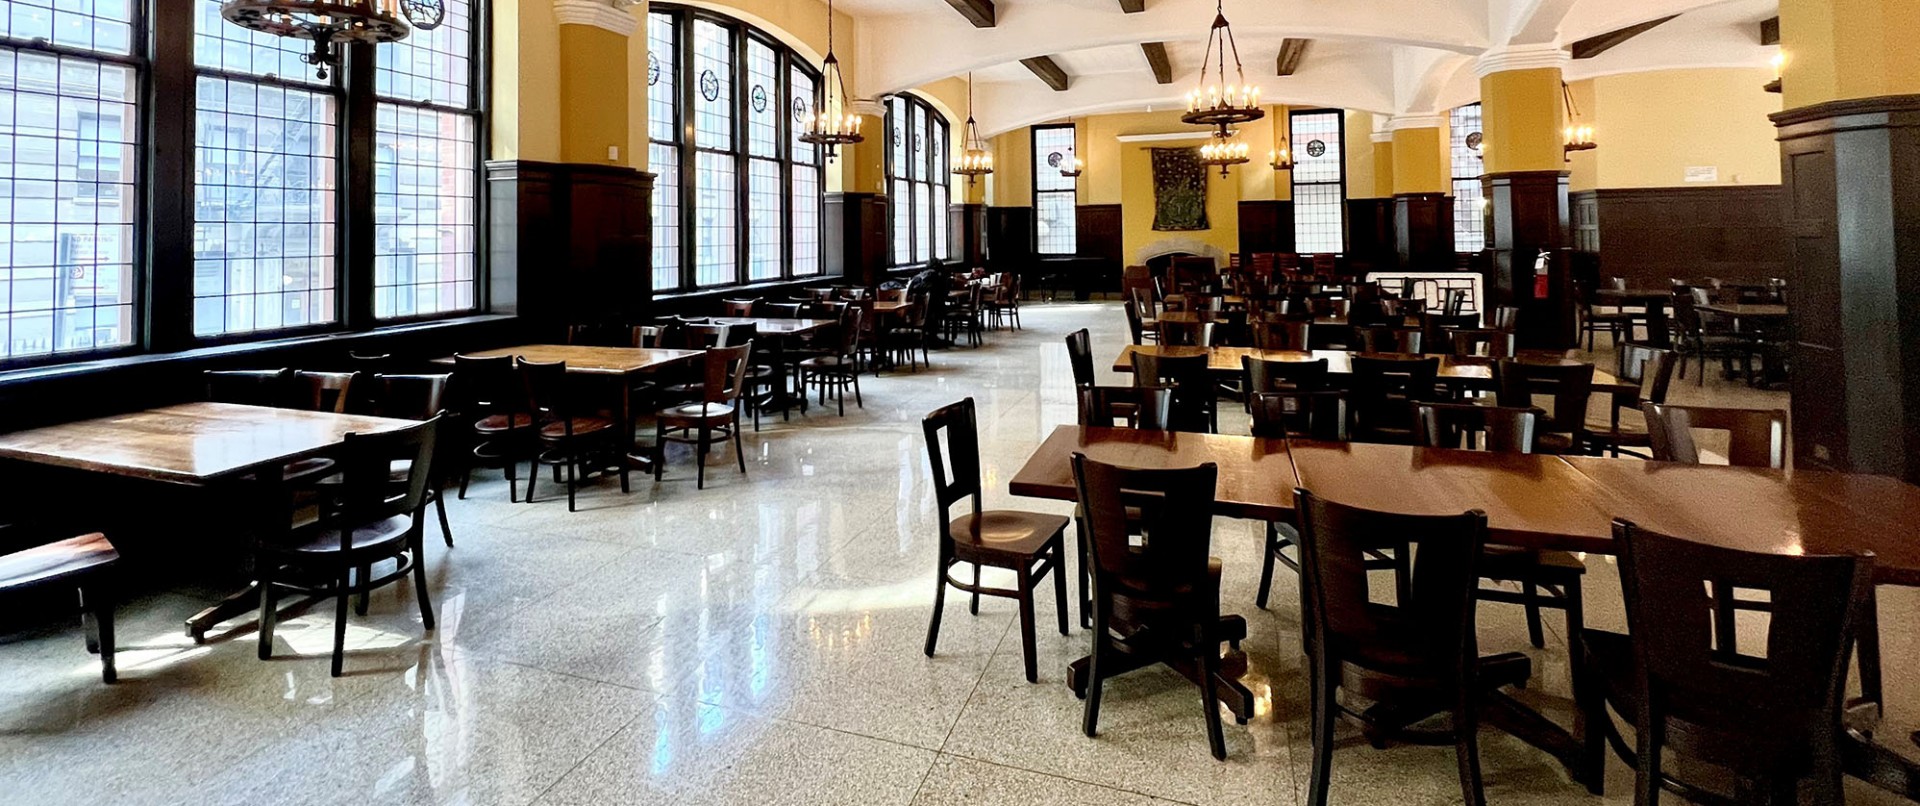 Grace Dodge Dining Hall at Teachers College